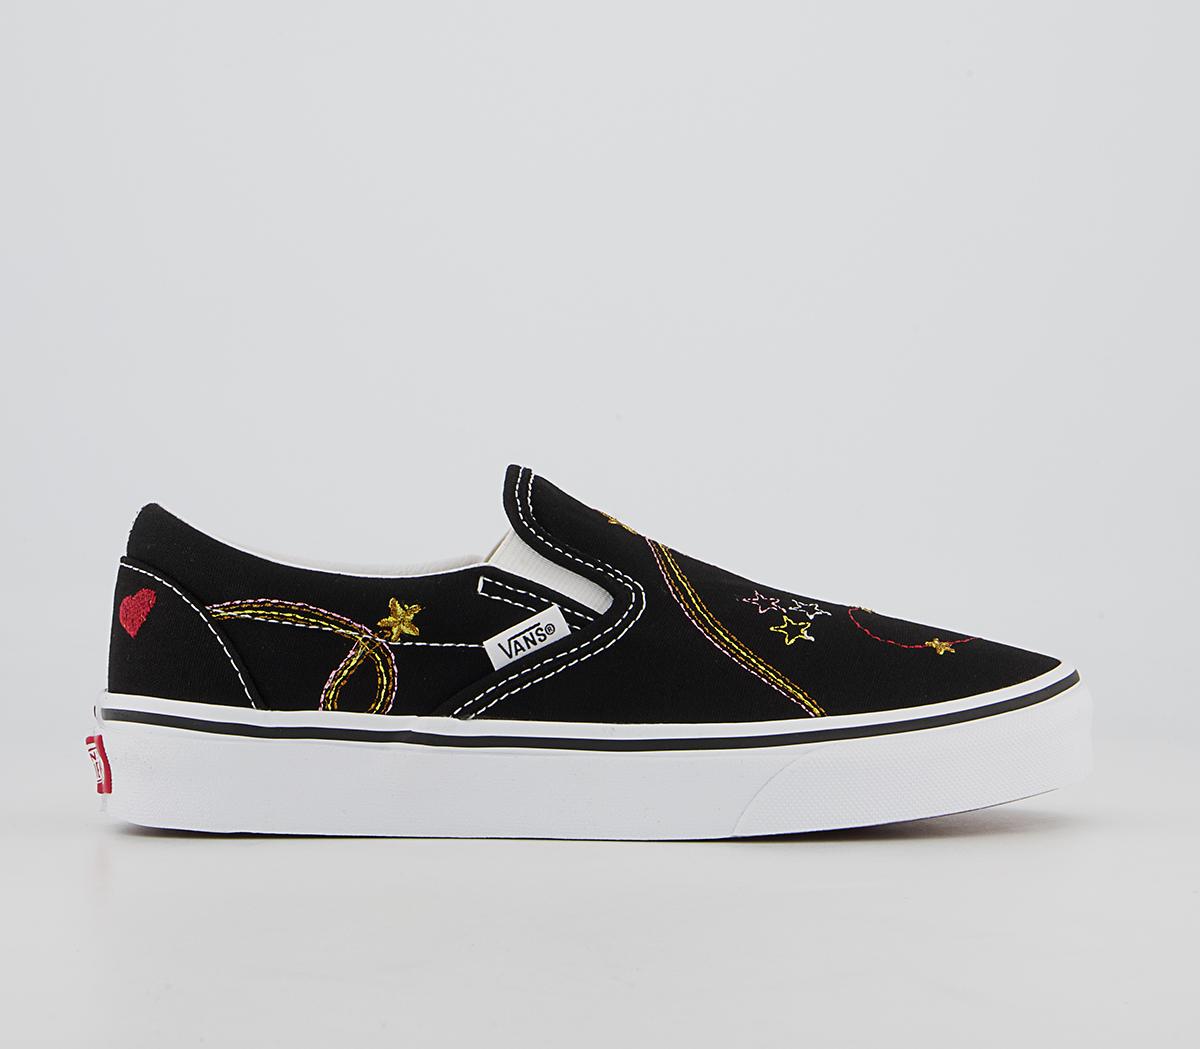 VansClassic Slip On TrainersBlack Gold Star Embroidery Exclusive